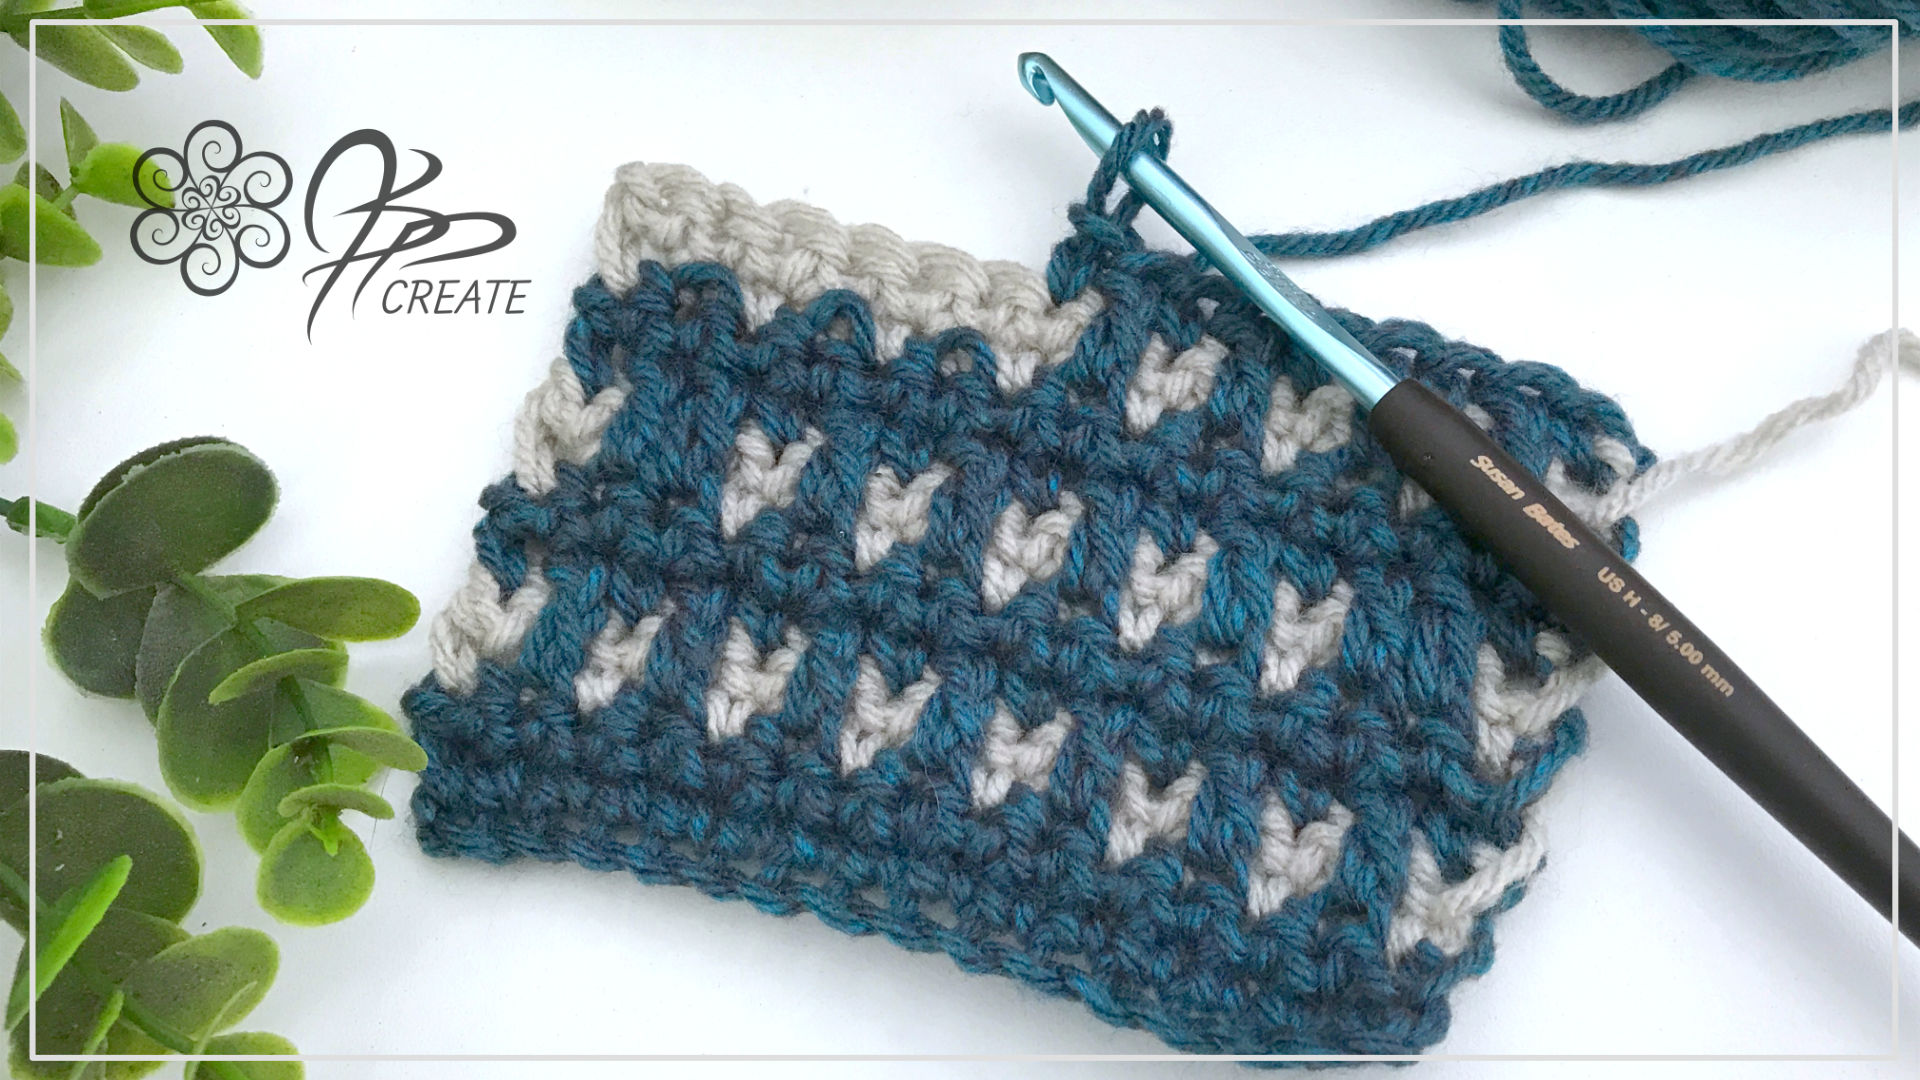 Learn The Basics Of Mosaic Crochet With This Free Tutorial And Chart Jspcreate Mosaic